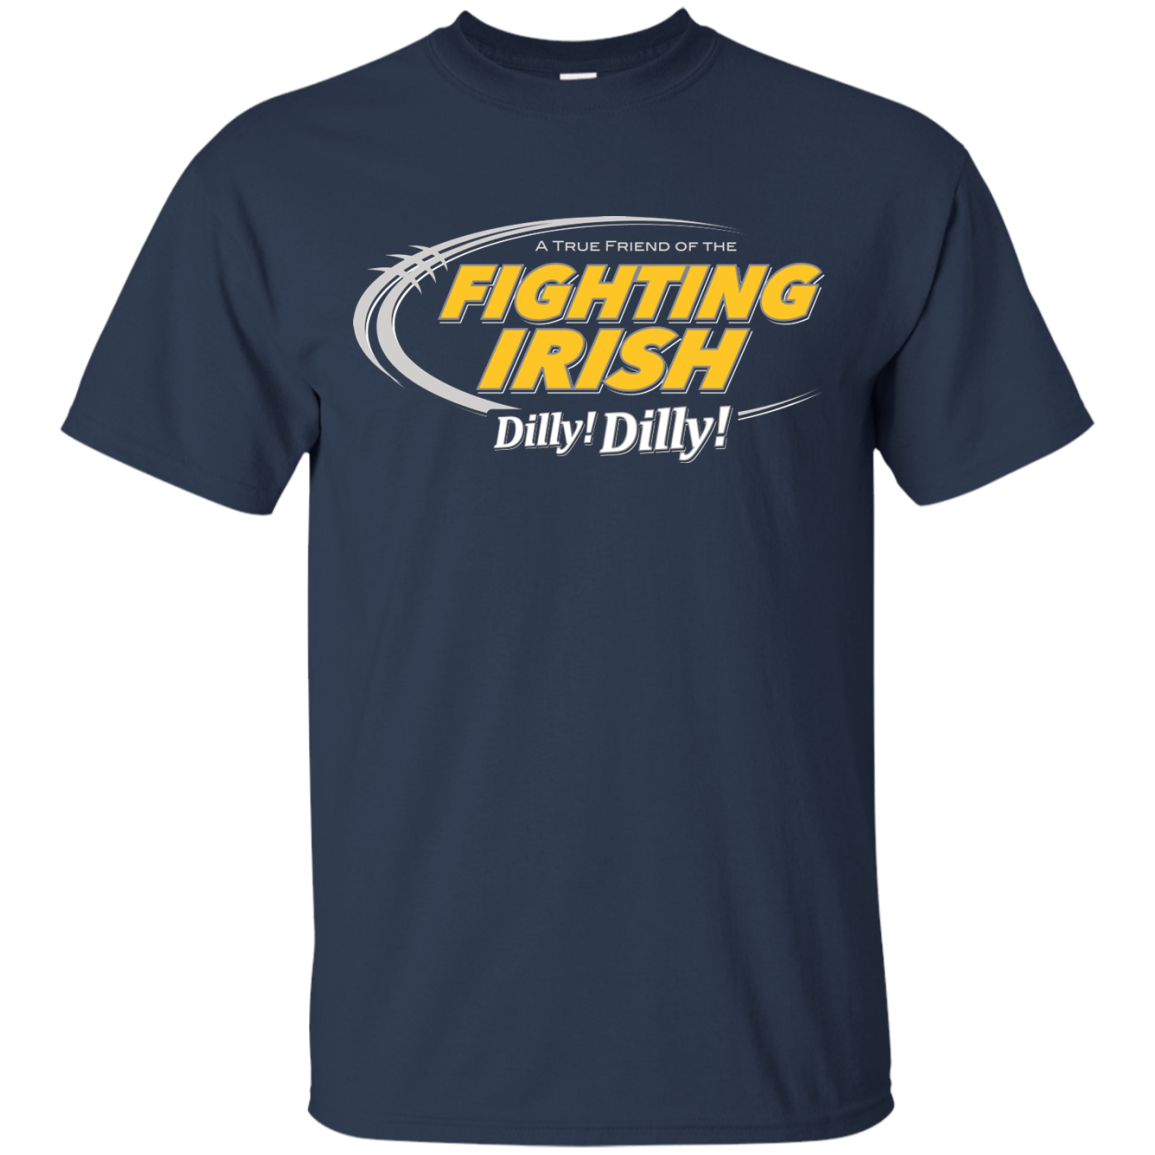 Notre Dame Dilly Dilly T-Shirt